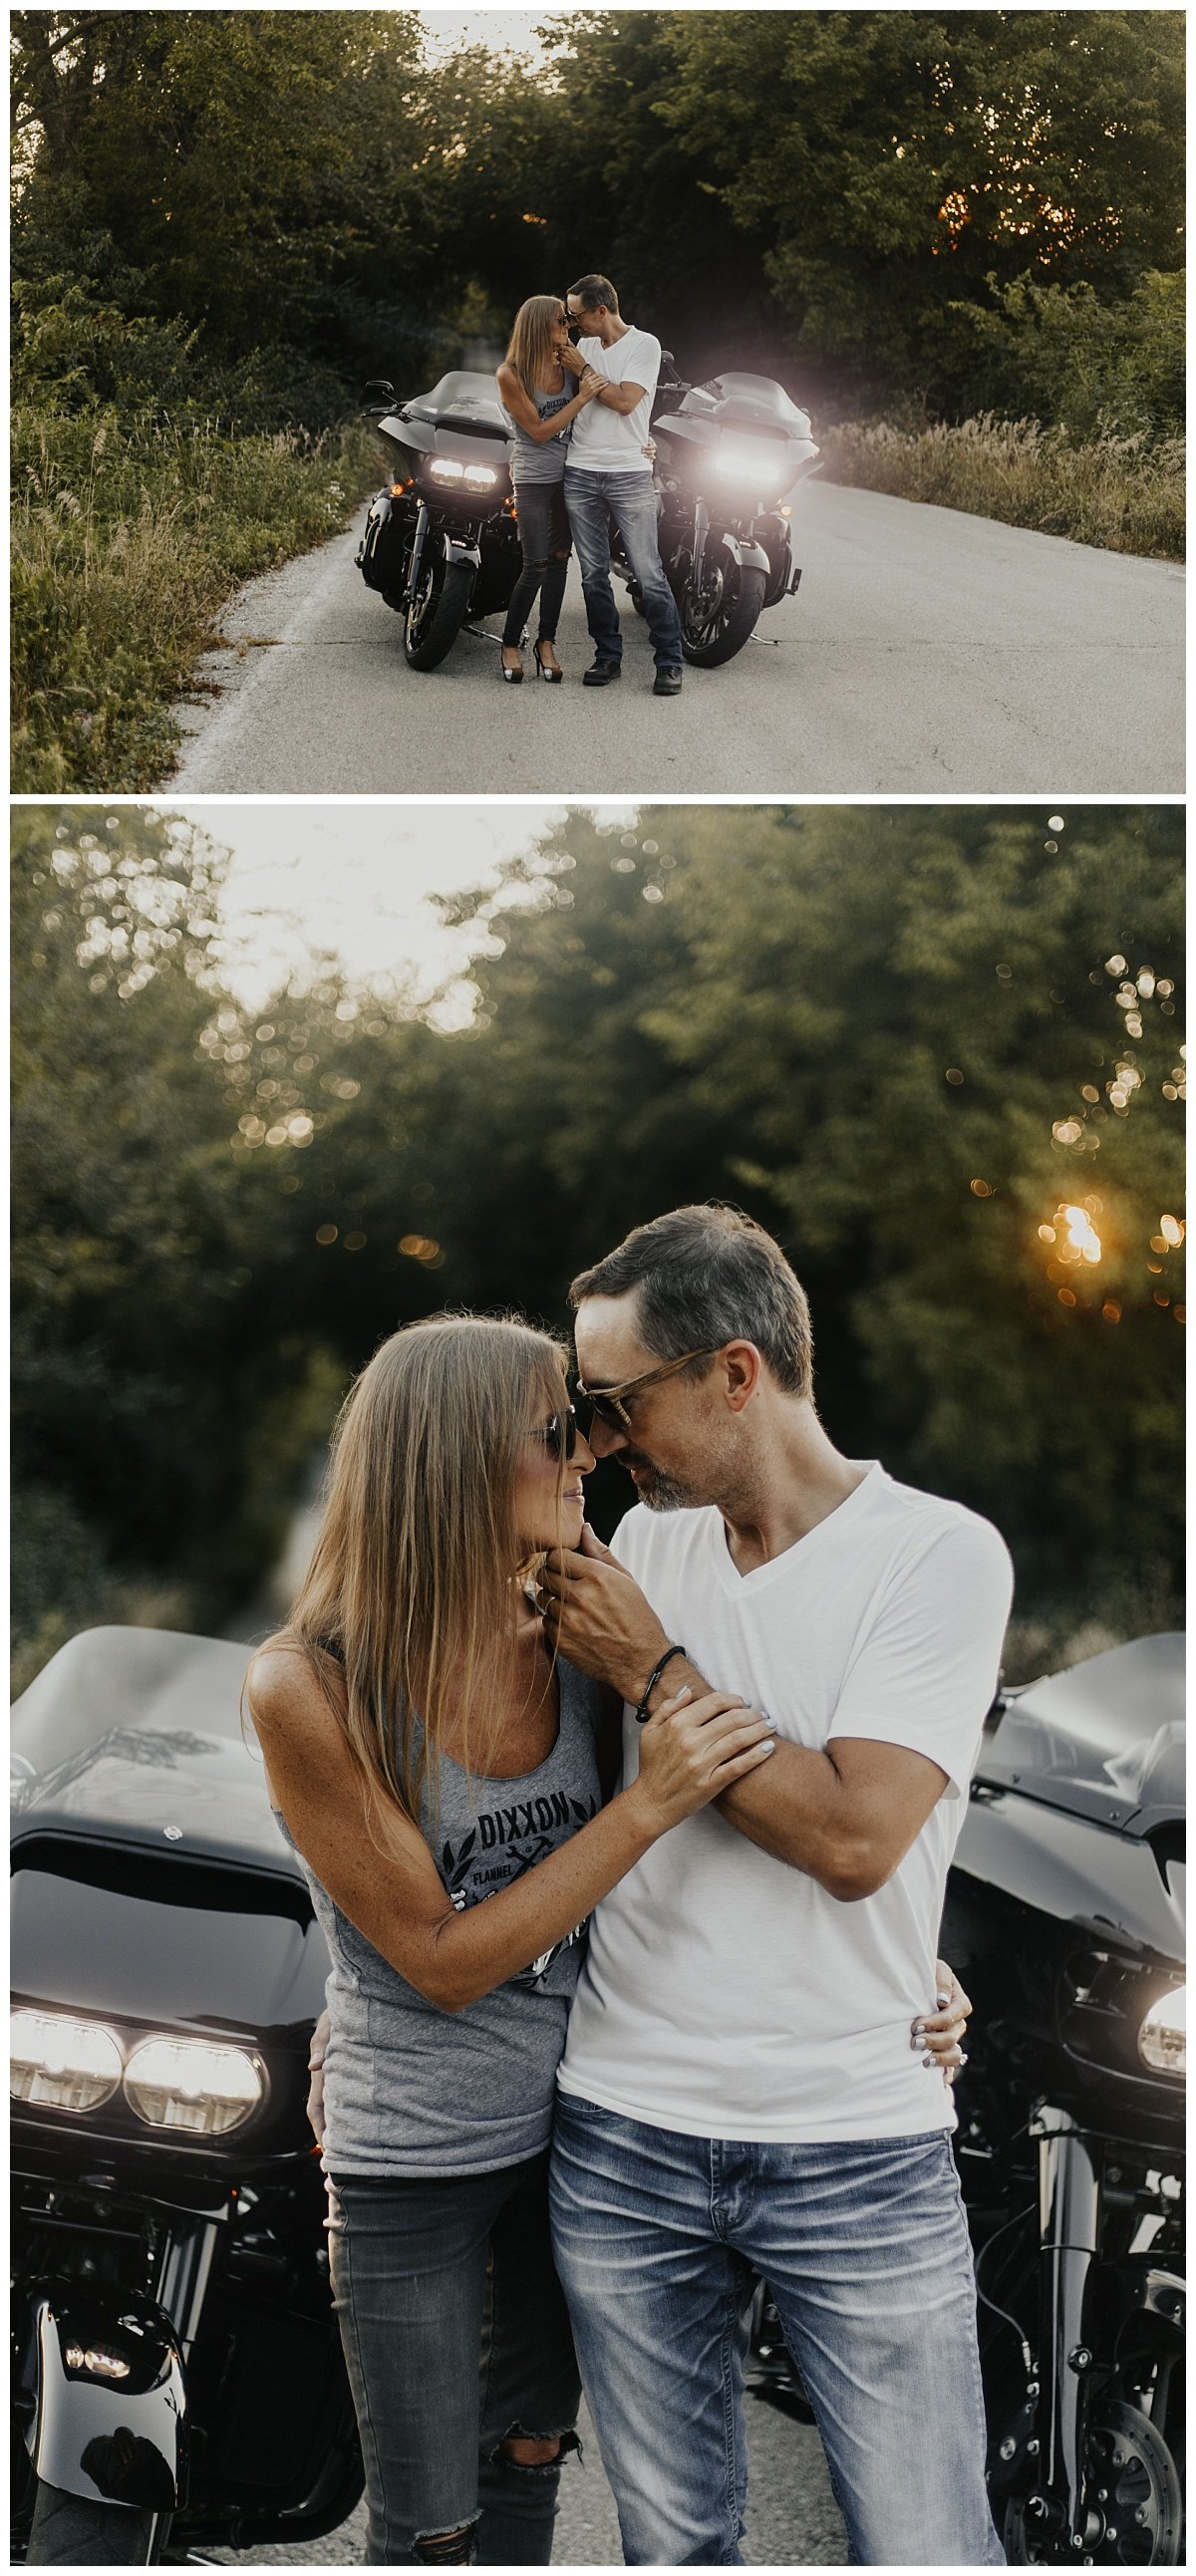 motorcycle+session+_+adventure+session+_+engagement+session+_+motorcycle+photos+_+lana+del+rey+_+ride+or+die+_+adventurous+couple+_+kansas+city+photographer+_+kansas+city+photography (2).jpeg